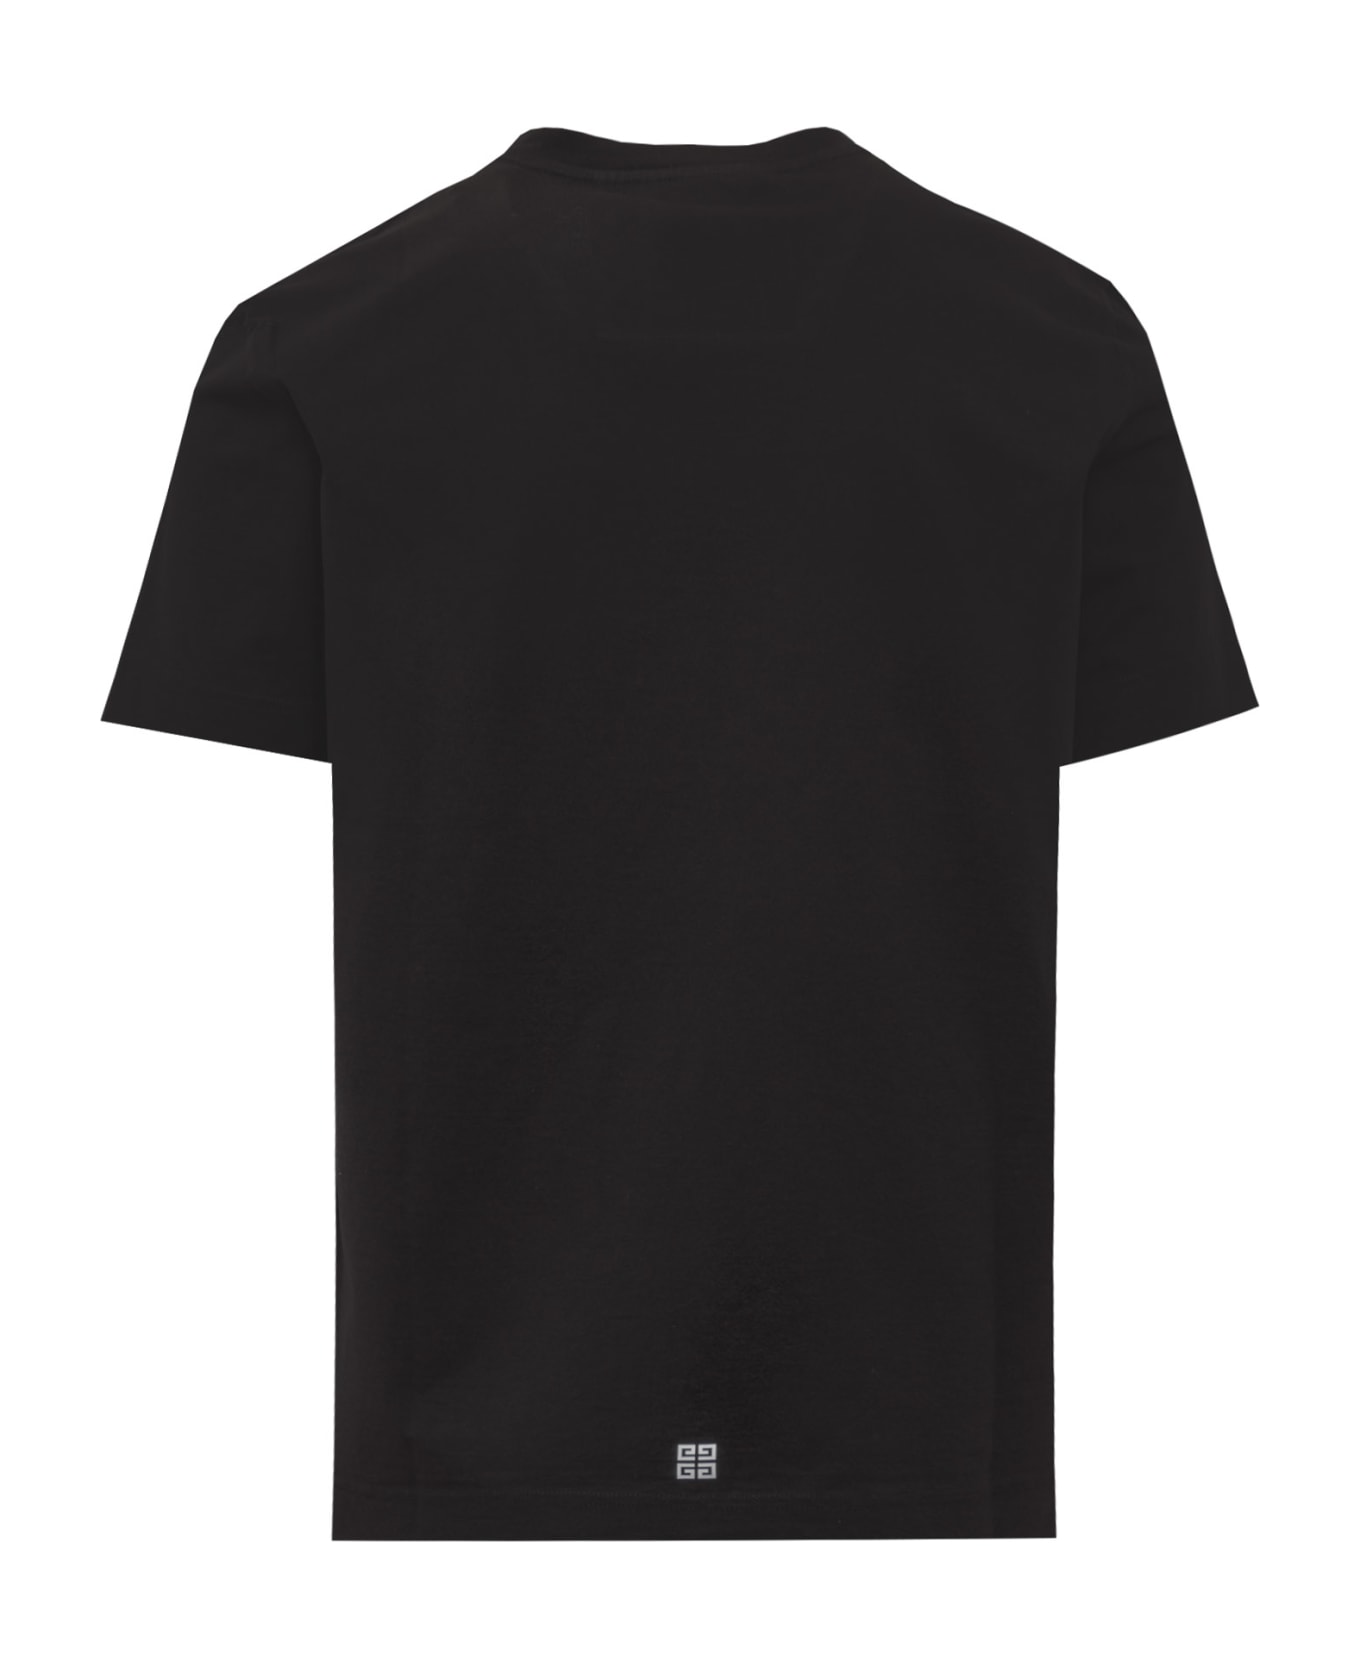 Givenchy T-shirt With Logo - Black シャツ